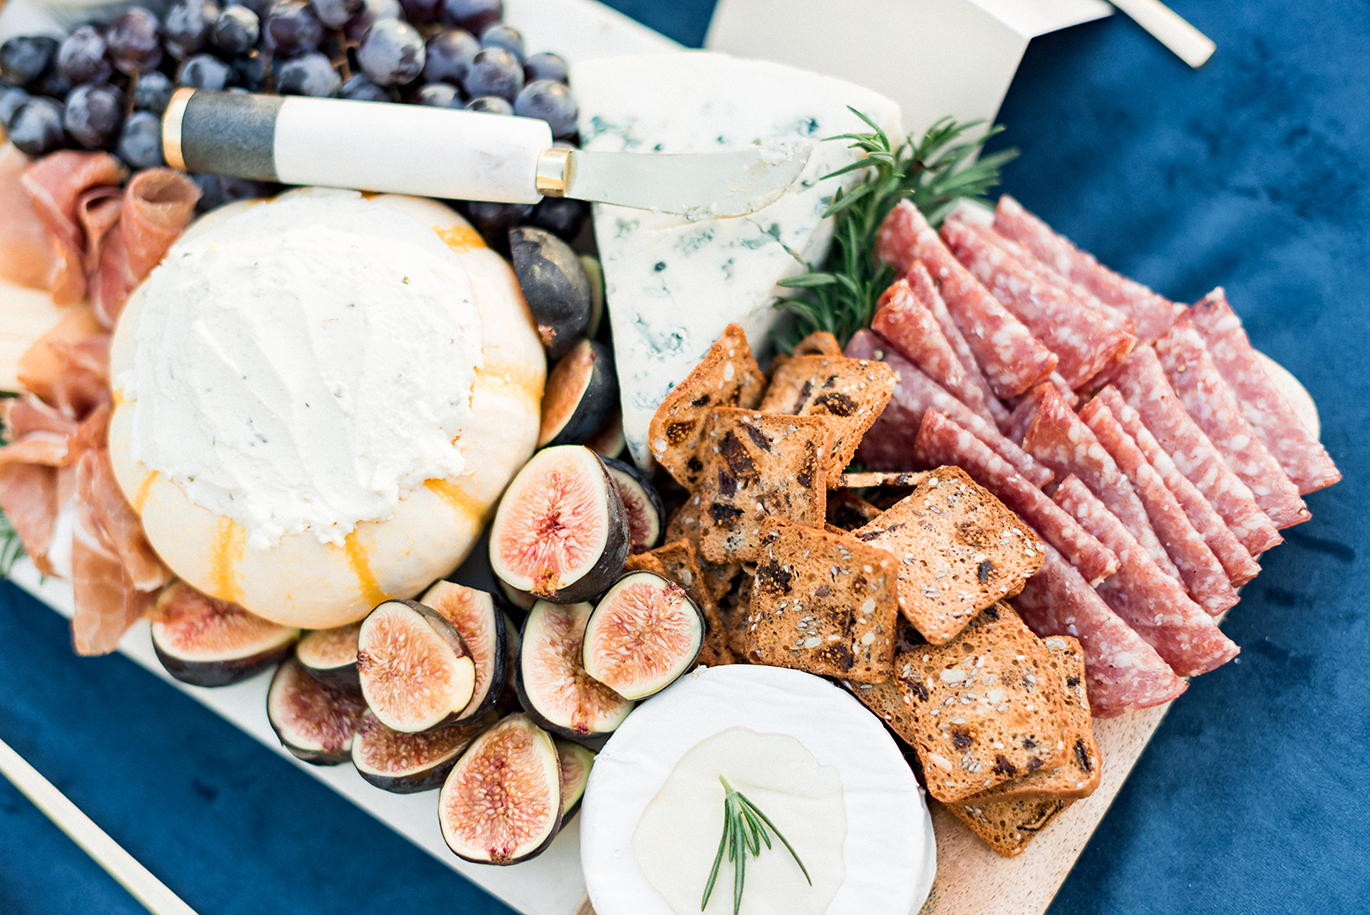 How to put together a cheese board